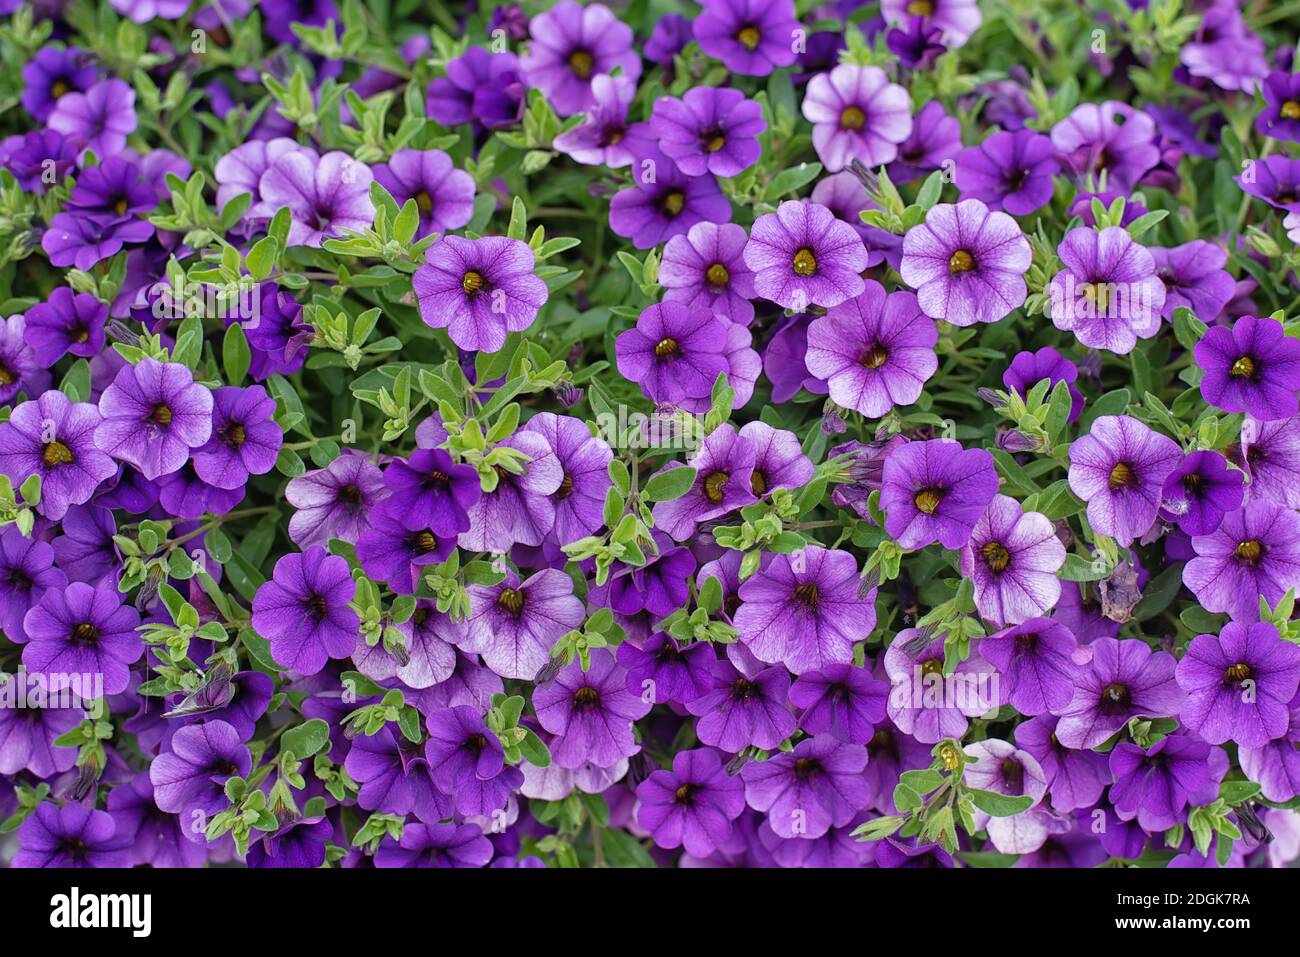 Pattern of small purple garden flowers with round petals. Stock Photo